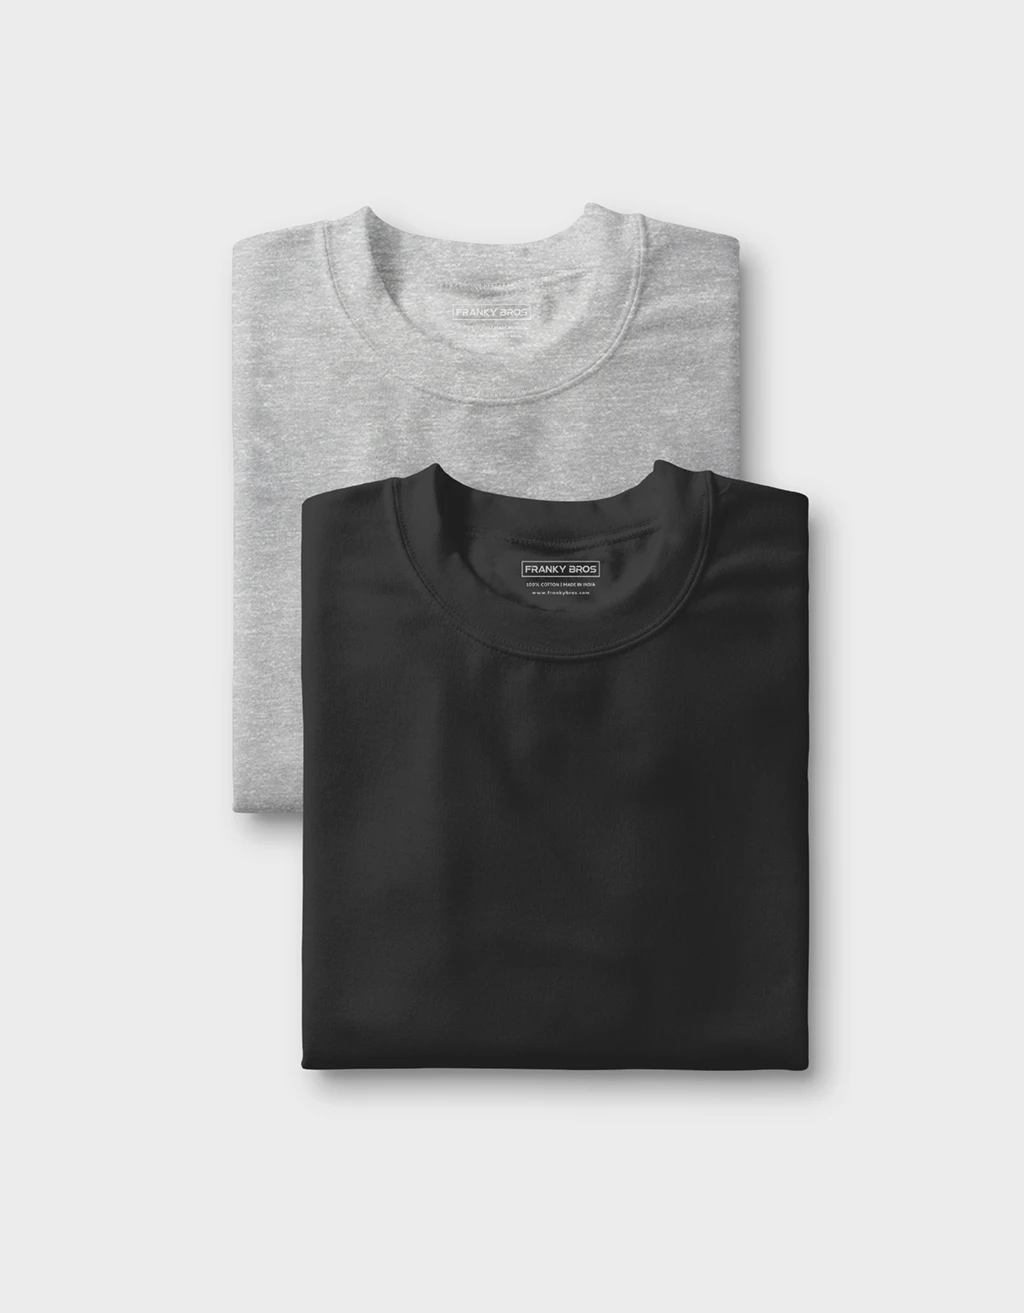 buy black and grey melange plain t-shirt for mens and womens t-shirt combo offer buy online in india